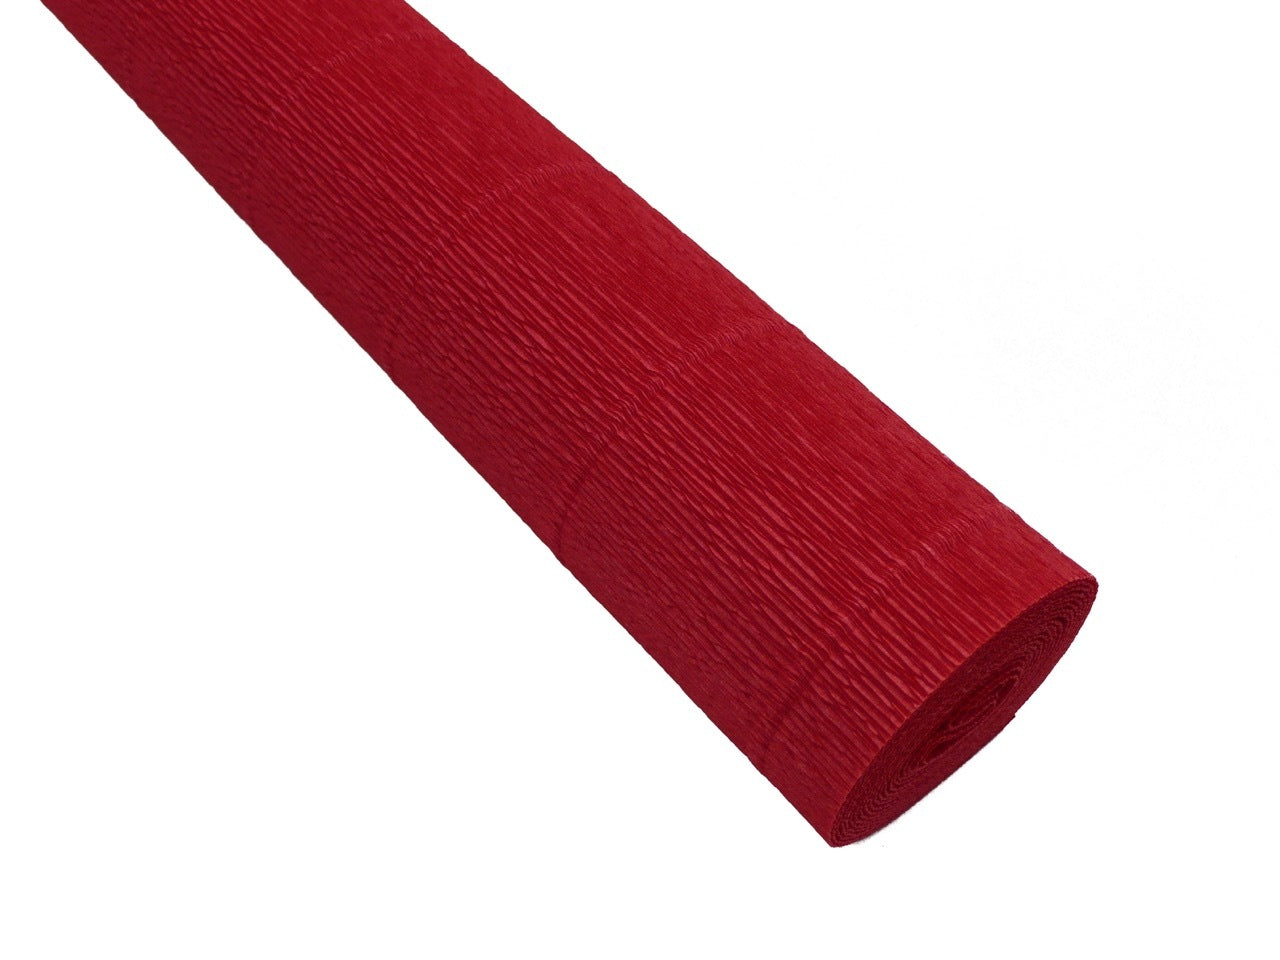 Scarlet Red heavyweight Italian crepe paper in 180 gram weight.